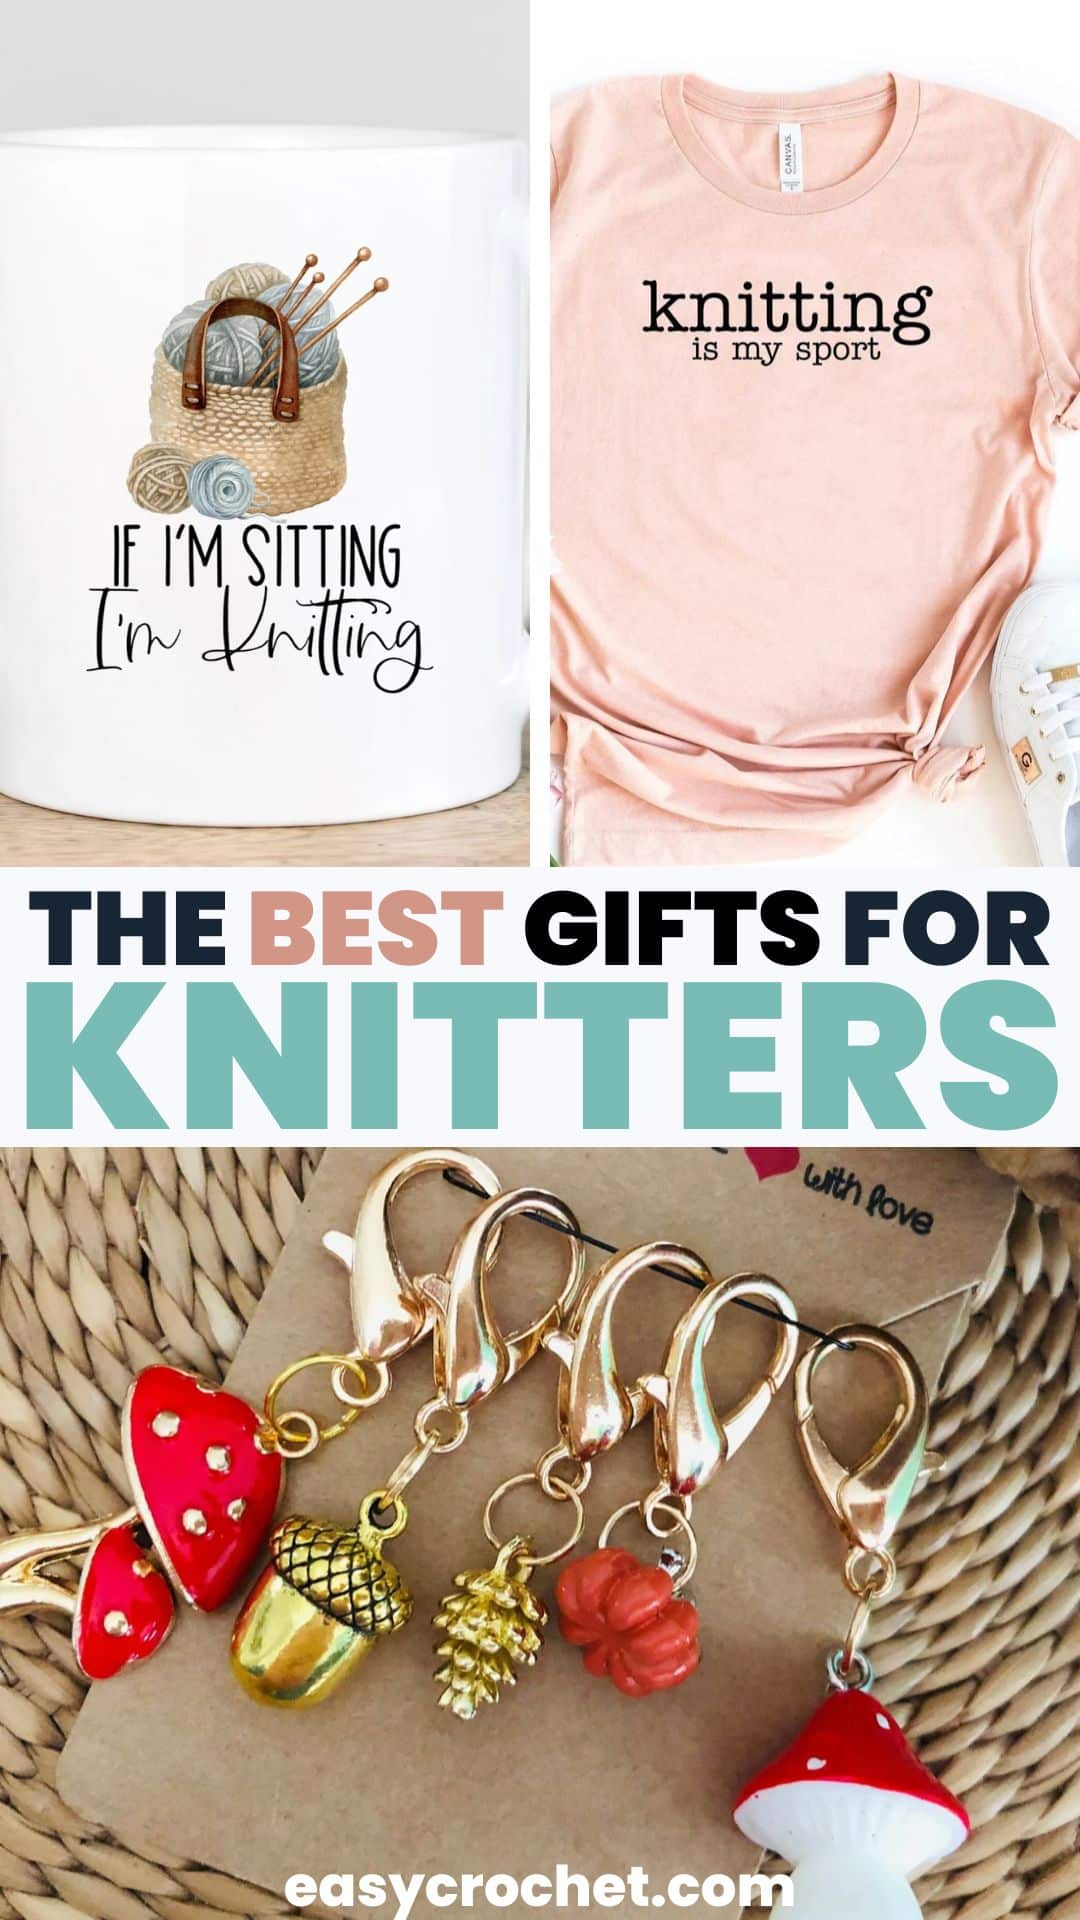 Knitting Gifts for Knitters - A Day Without Knitting Funny Gag Gift Ideas  for People Who Love Yarn and To Knit Tote Bag for Sale by merkraht